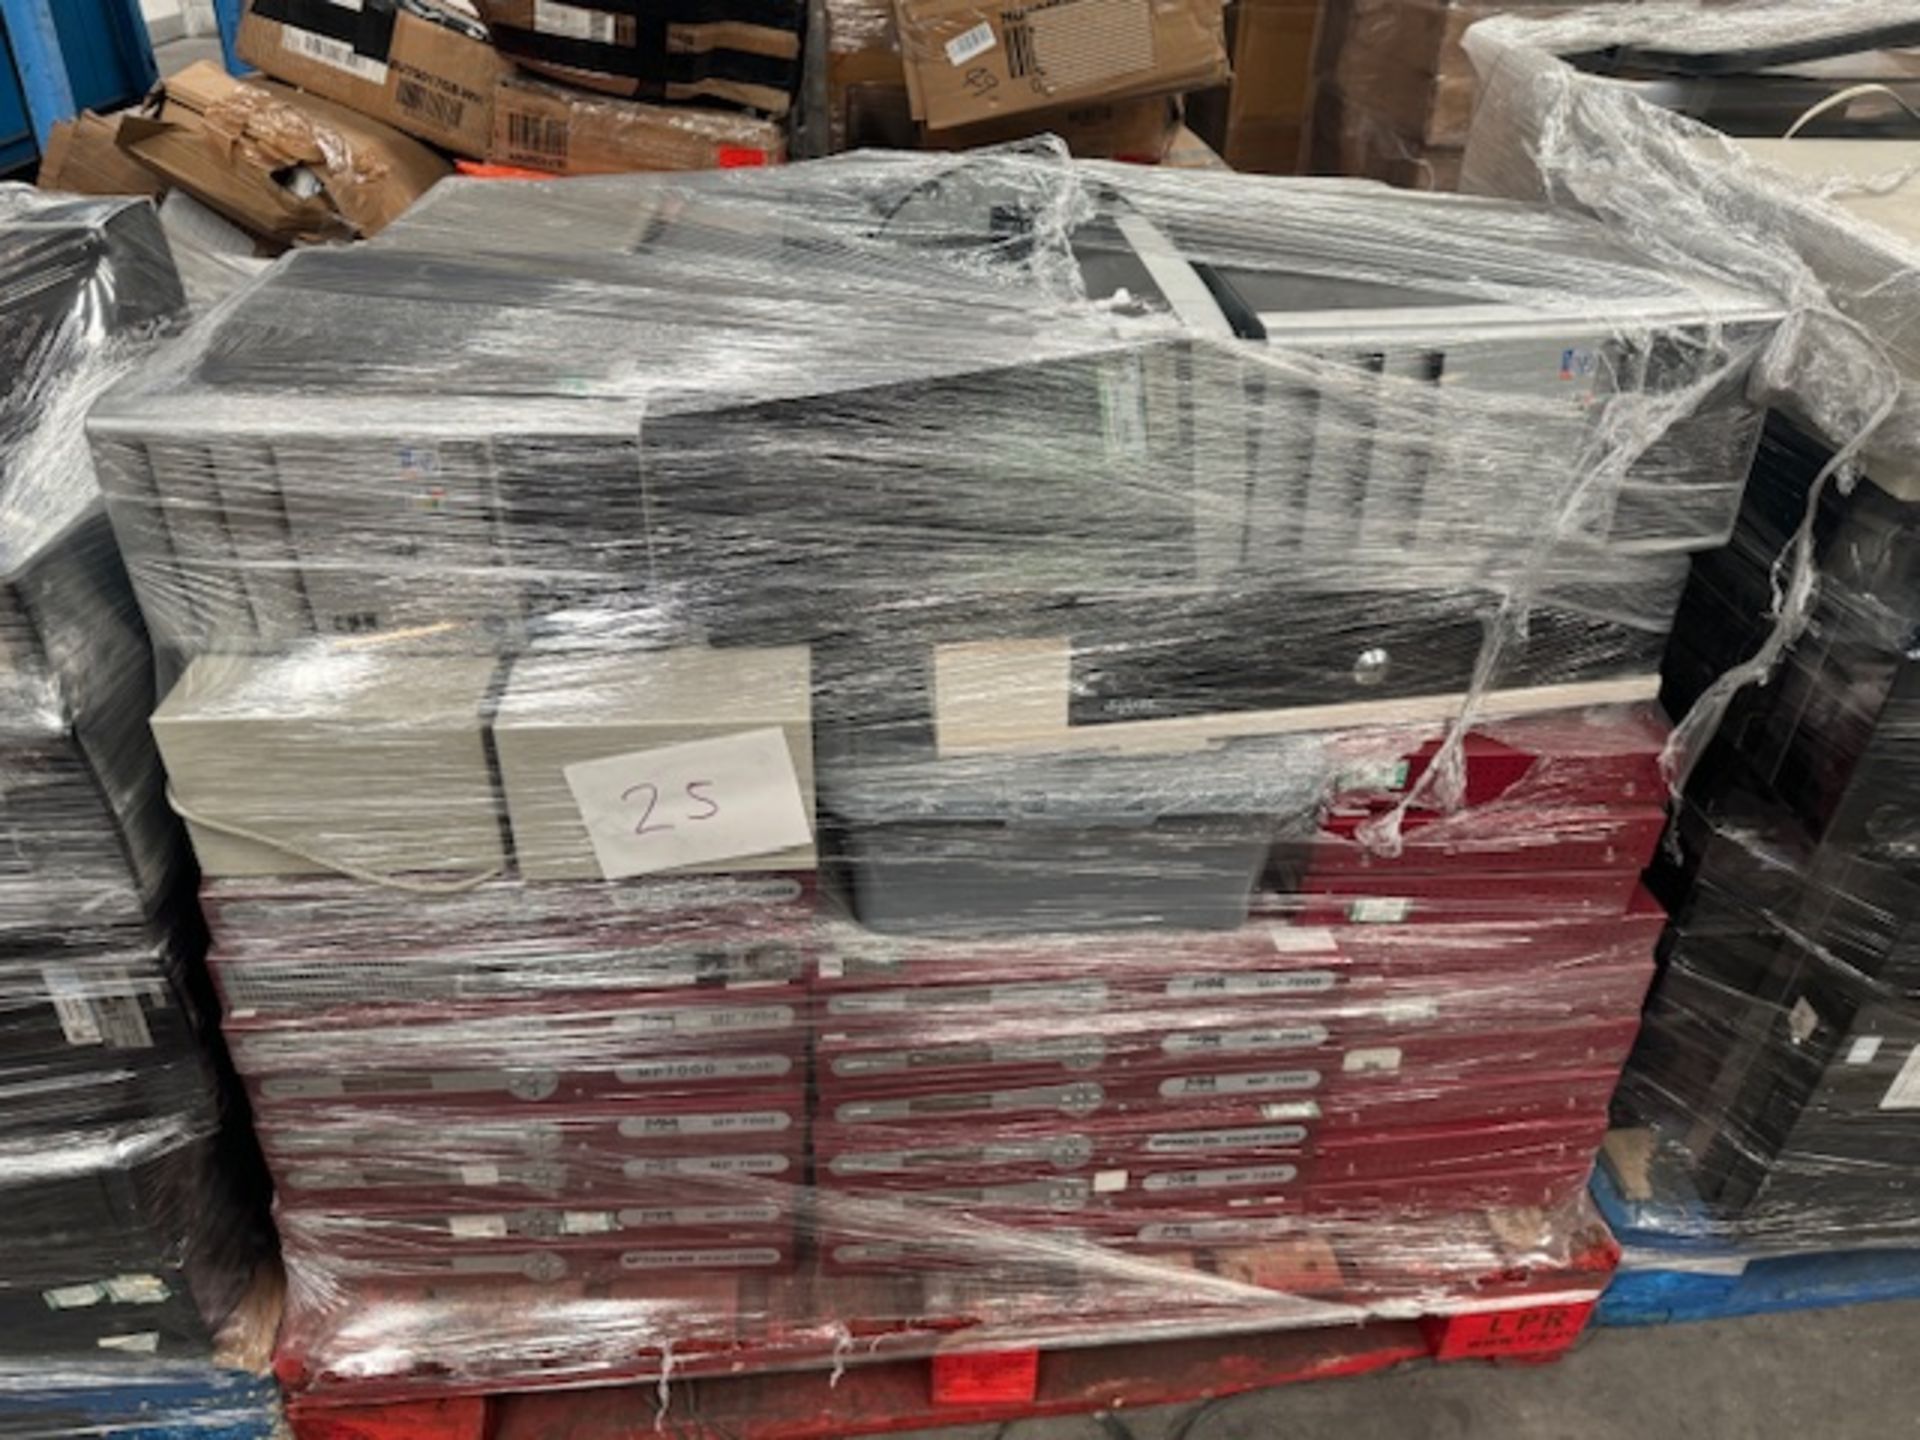 IT PALLET LOT INCLUDING PC COMPUTERS MP 7000 MEDIA PLAYERS, MONITORS ETC COST NEW 12K